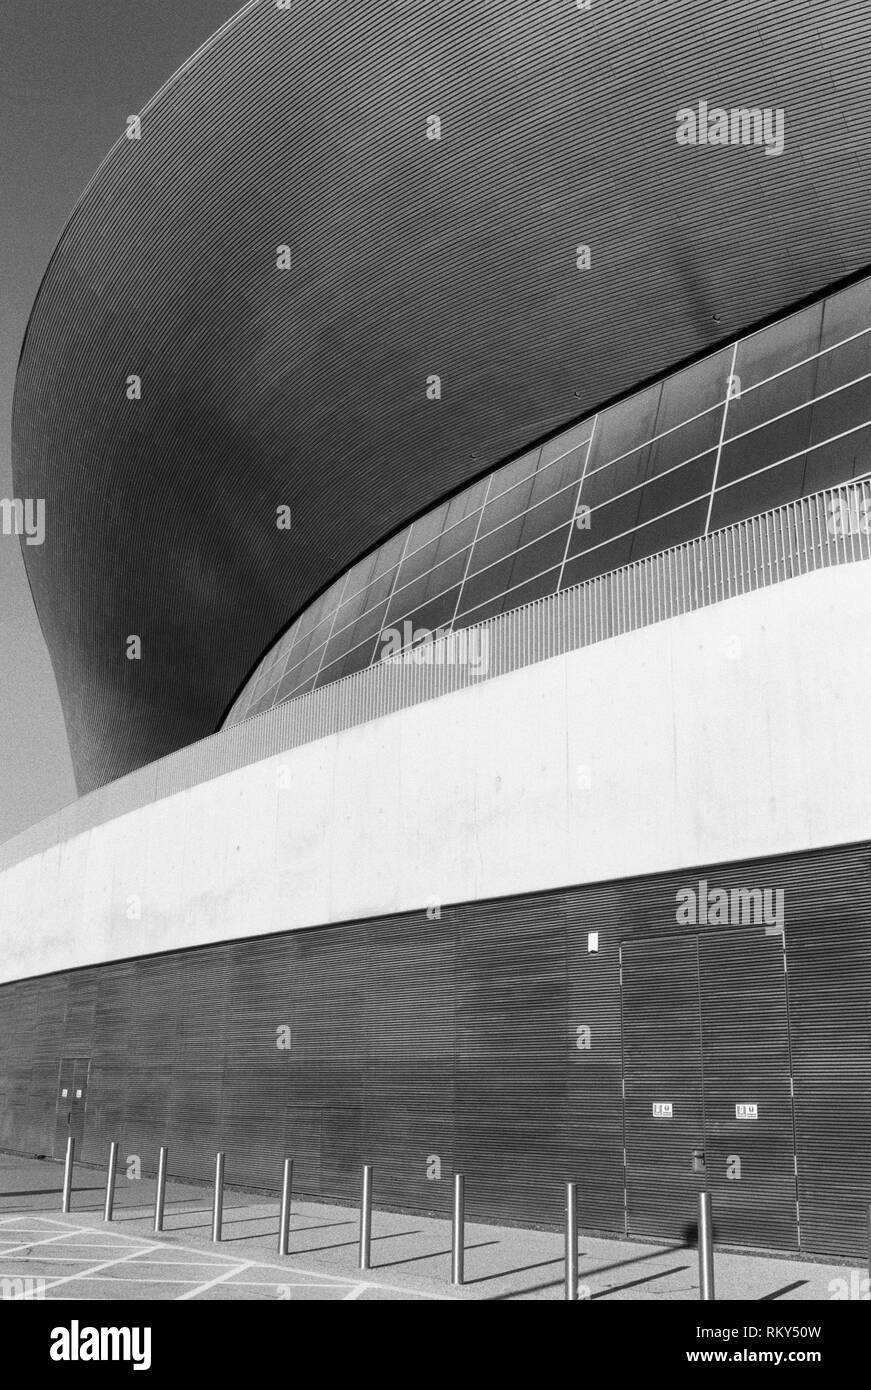 The exterior of the London Aquatics Centre in Queen Elizabeth Olympic Park, Stratford, East London UK Stock Photo